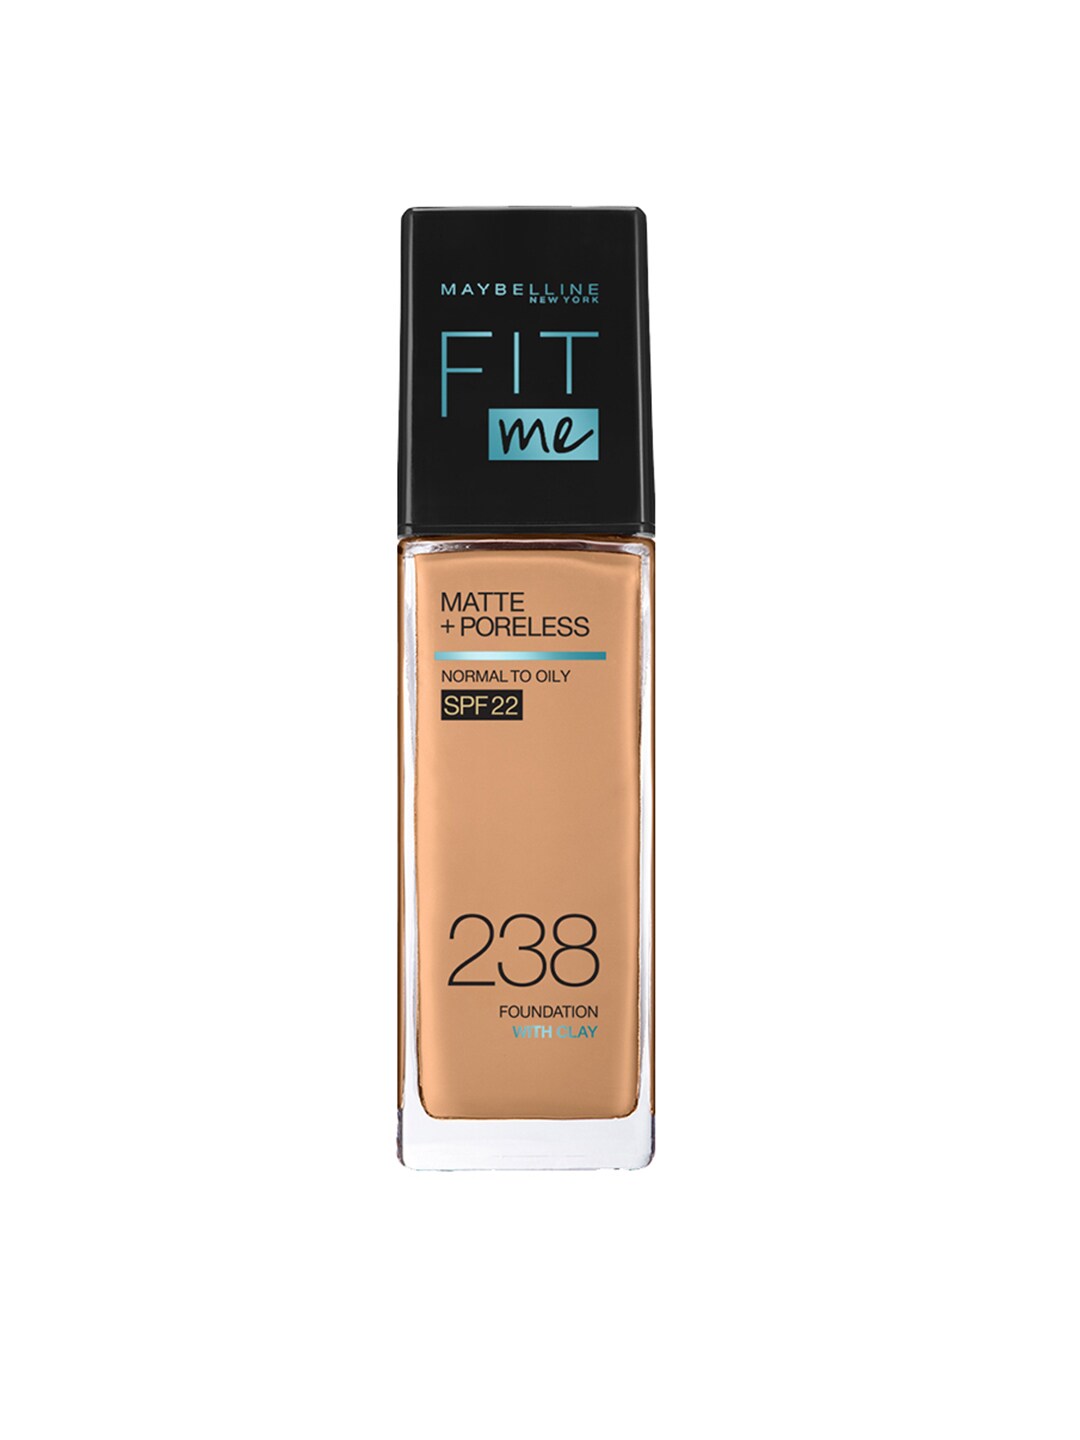 Maybelline New York Fit Me Matte Poreless SPF 22 Foundation 30 ml - Rich Tan 238 Price in India